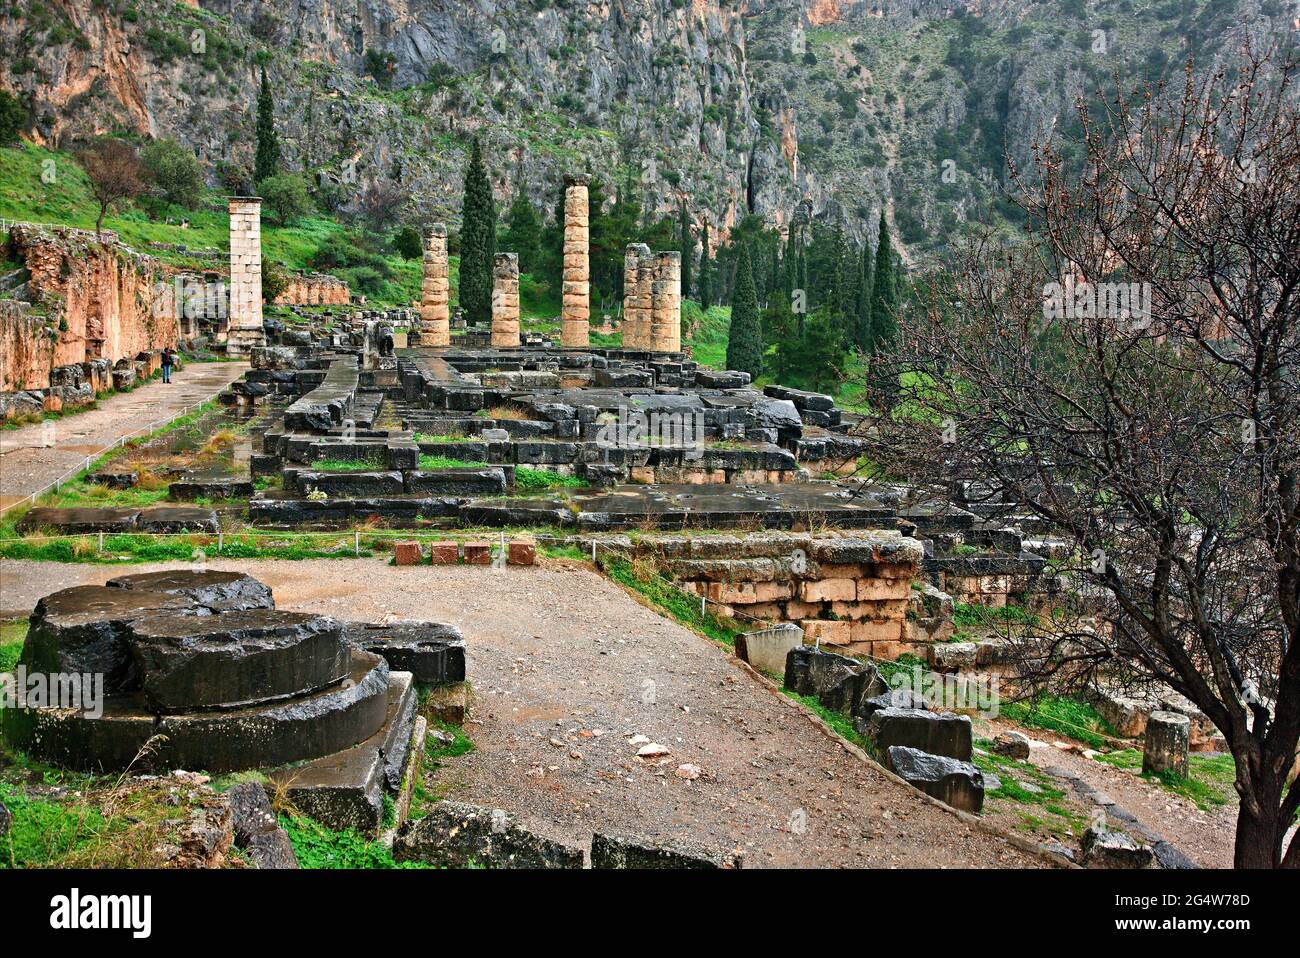 The temple of Apollo at ancient Delphi, the 'navel' of the ancient world, Fokida, Central Greece. Stock Photo